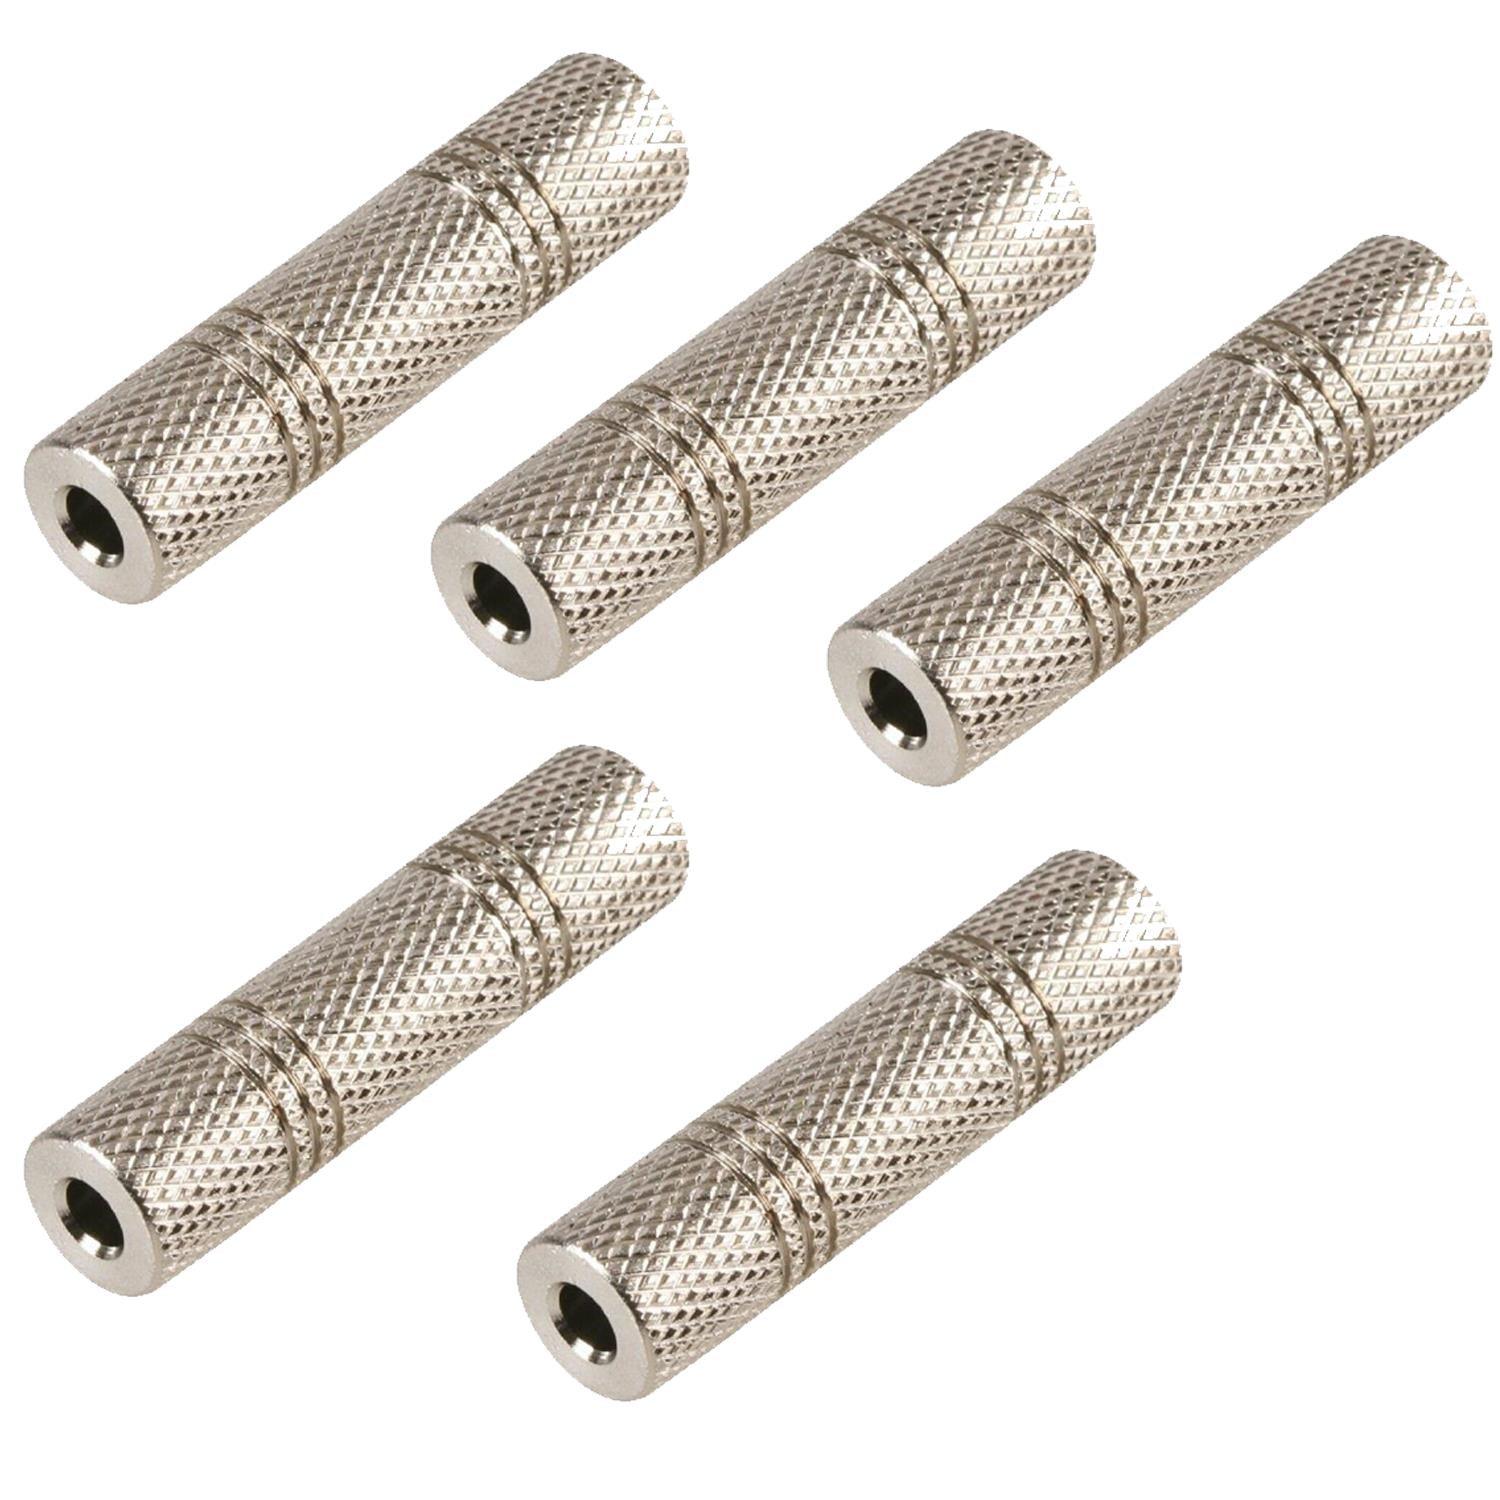 5 x QTX Coupler 3.5mm Stereo Jack Socket to 3.5mm Stereo Jack Socket - DY Pro Audio